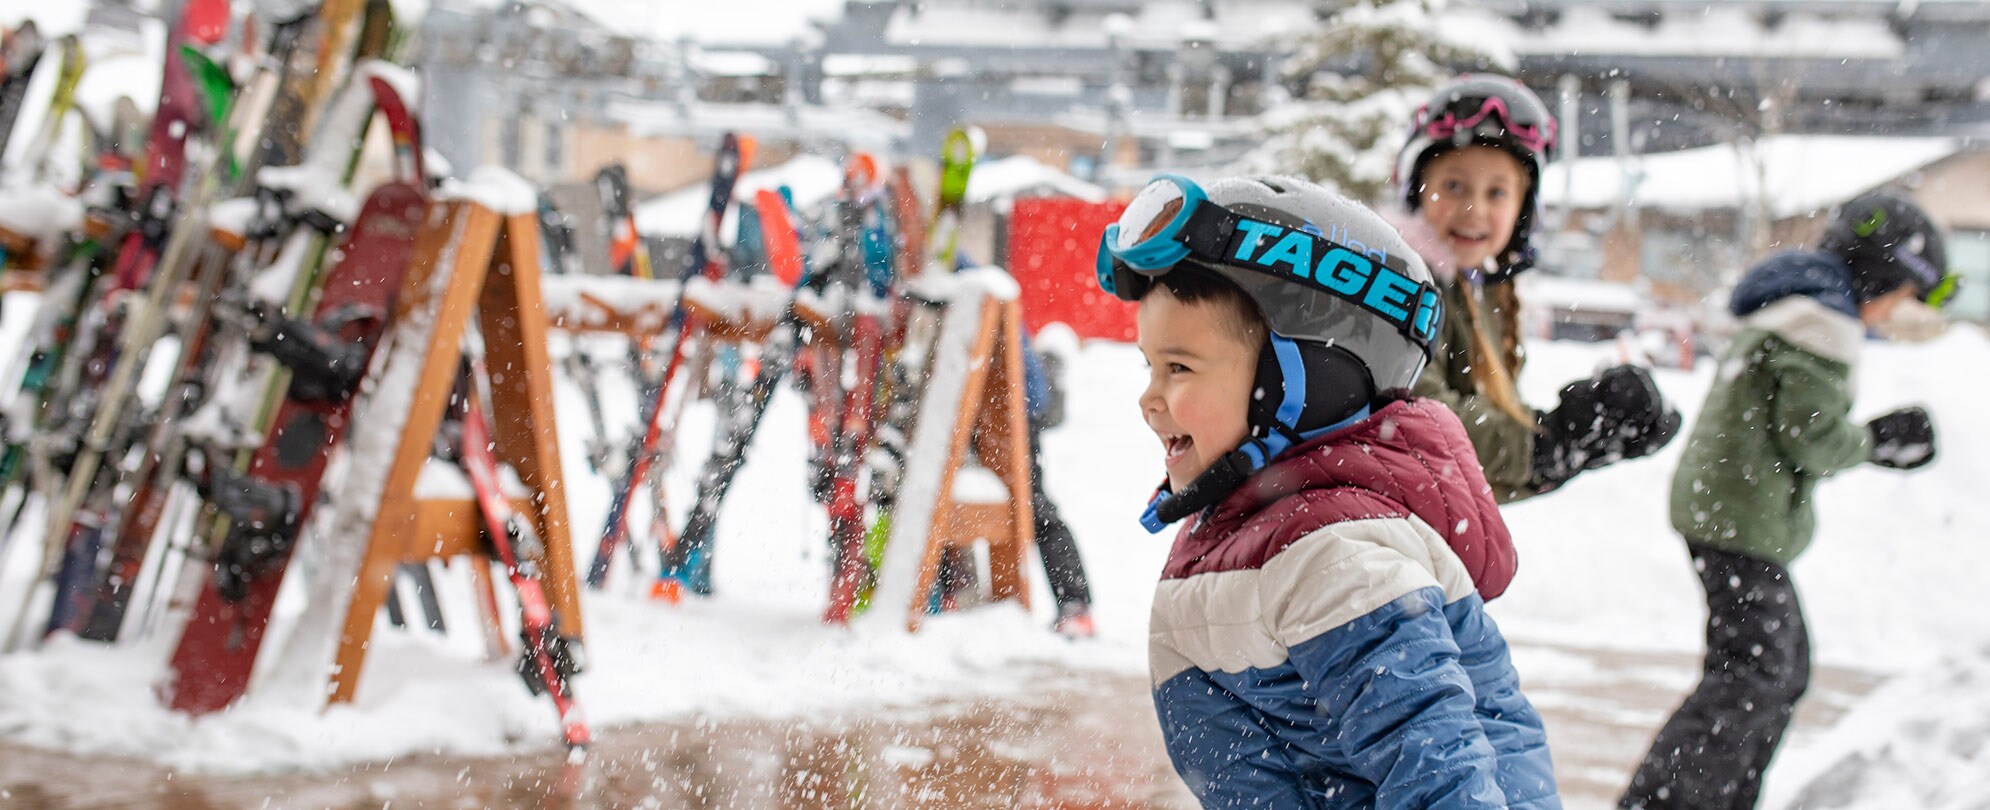 Children laughing and playing in the snow in Park City, Utah